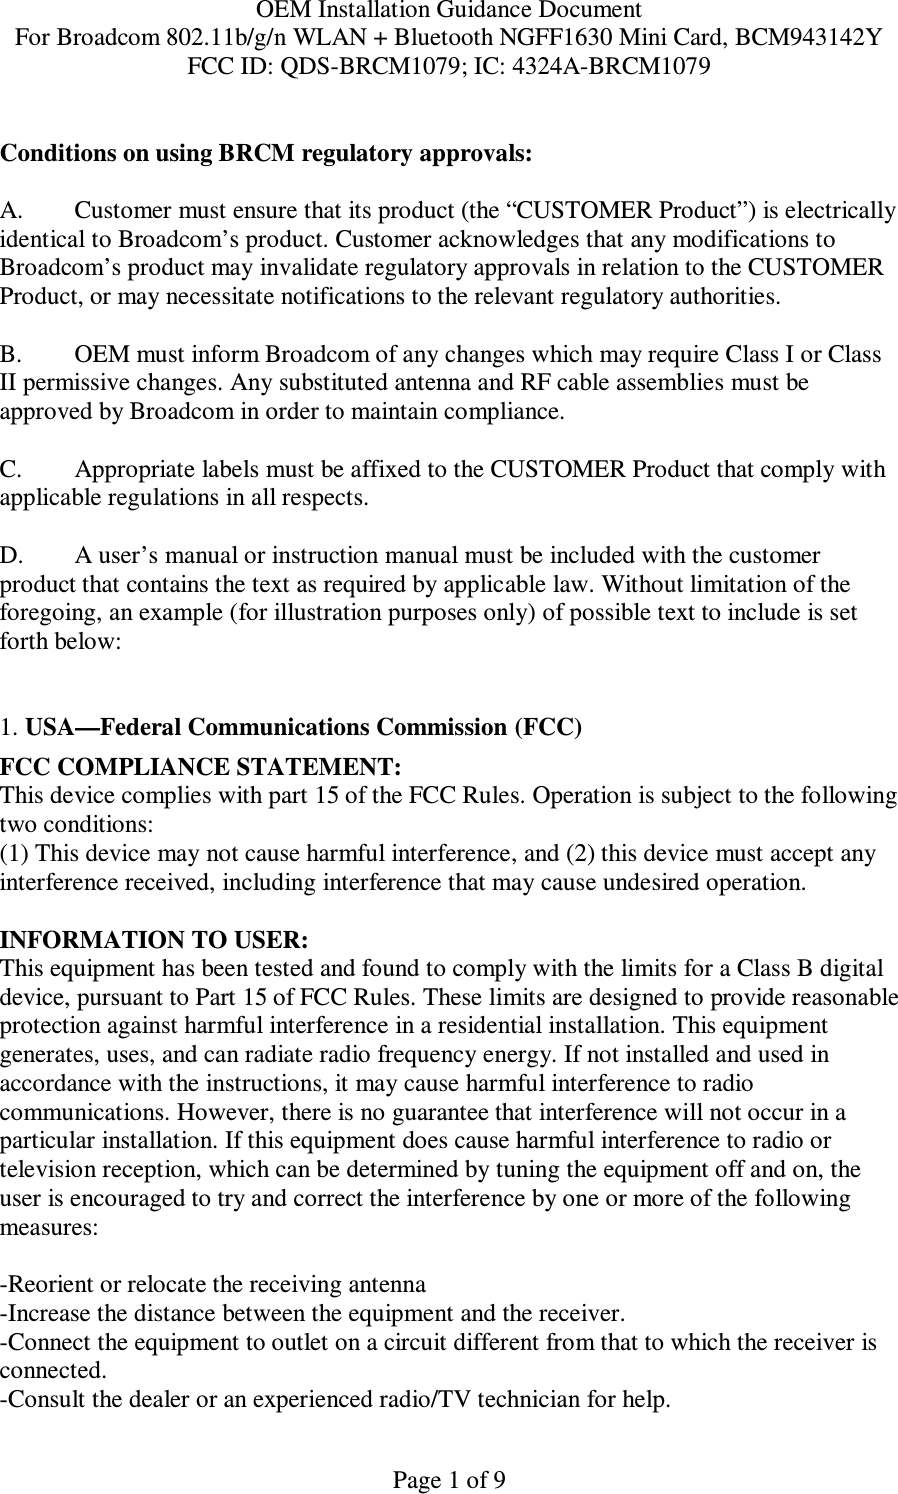 OEM Installation Guidance Document For Broadcom 802.11b/g/n WLAN + Bluetooth NGFF1630 Mini Card, BCM943142Y FCC ID: QDS-BRCM1079; IC: 4324A-BRCM1079   Page 1 of 9 Conditions on using BRCM regulatory approvals:   A.  Customer must ensure that its product (the “CUSTOMER Product”) is electrically identical to Broadcom’s product. Customer acknowledges that any modifications to Broadcom’s product may invalidate regulatory approvals in relation to the CUSTOMER Product, or may necessitate notifications to the relevant regulatory authorities.   B.   OEM must inform Broadcom of any changes which may require Class I or Class II permissive changes. Any substituted antenna and RF cable assemblies must be approved by Broadcom in order to maintain compliance.  C.  Appropriate labels must be affixed to the CUSTOMER Product that comply with  applicable regulations in all respects.    D.   A user’s manual or instruction manual must be included with the customer product that contains the text as required by applicable law. Without limitation of the foregoing, an example (for illustration purposes only) of possible text to include is set forth below:    1. USA—Federal Communications Commission (FCC) FCC COMPLIANCE STATEMENT: This device complies with part 15 of the FCC Rules. Operation is subject to the following two conditions: (1) This device may not cause harmful interference, and (2) this device must accept any interference received, including interference that may cause undesired operation.  INFORMATION TO USER: This equipment has been tested and found to comply with the limits for a Class B digital device, pursuant to Part 15 of FCC Rules. These limits are designed to provide reasonable protection against harmful interference in a residential installation. This equipment generates, uses, and can radiate radio frequency energy. If not installed and used in accordance with the instructions, it may cause harmful interference to radio communications. However, there is no guarantee that interference will not occur in a particular installation. If this equipment does cause harmful interference to radio or television reception, which can be determined by tuning the equipment off and on, the user is encouraged to try and correct the interference by one or more of the following measures:    -Reorient or relocate the receiving antenna -Increase the distance between the equipment and the receiver. -Connect the equipment to outlet on a circuit different from that to which the receiver is connected. -Consult the dealer or an experienced radio/TV technician for help. 